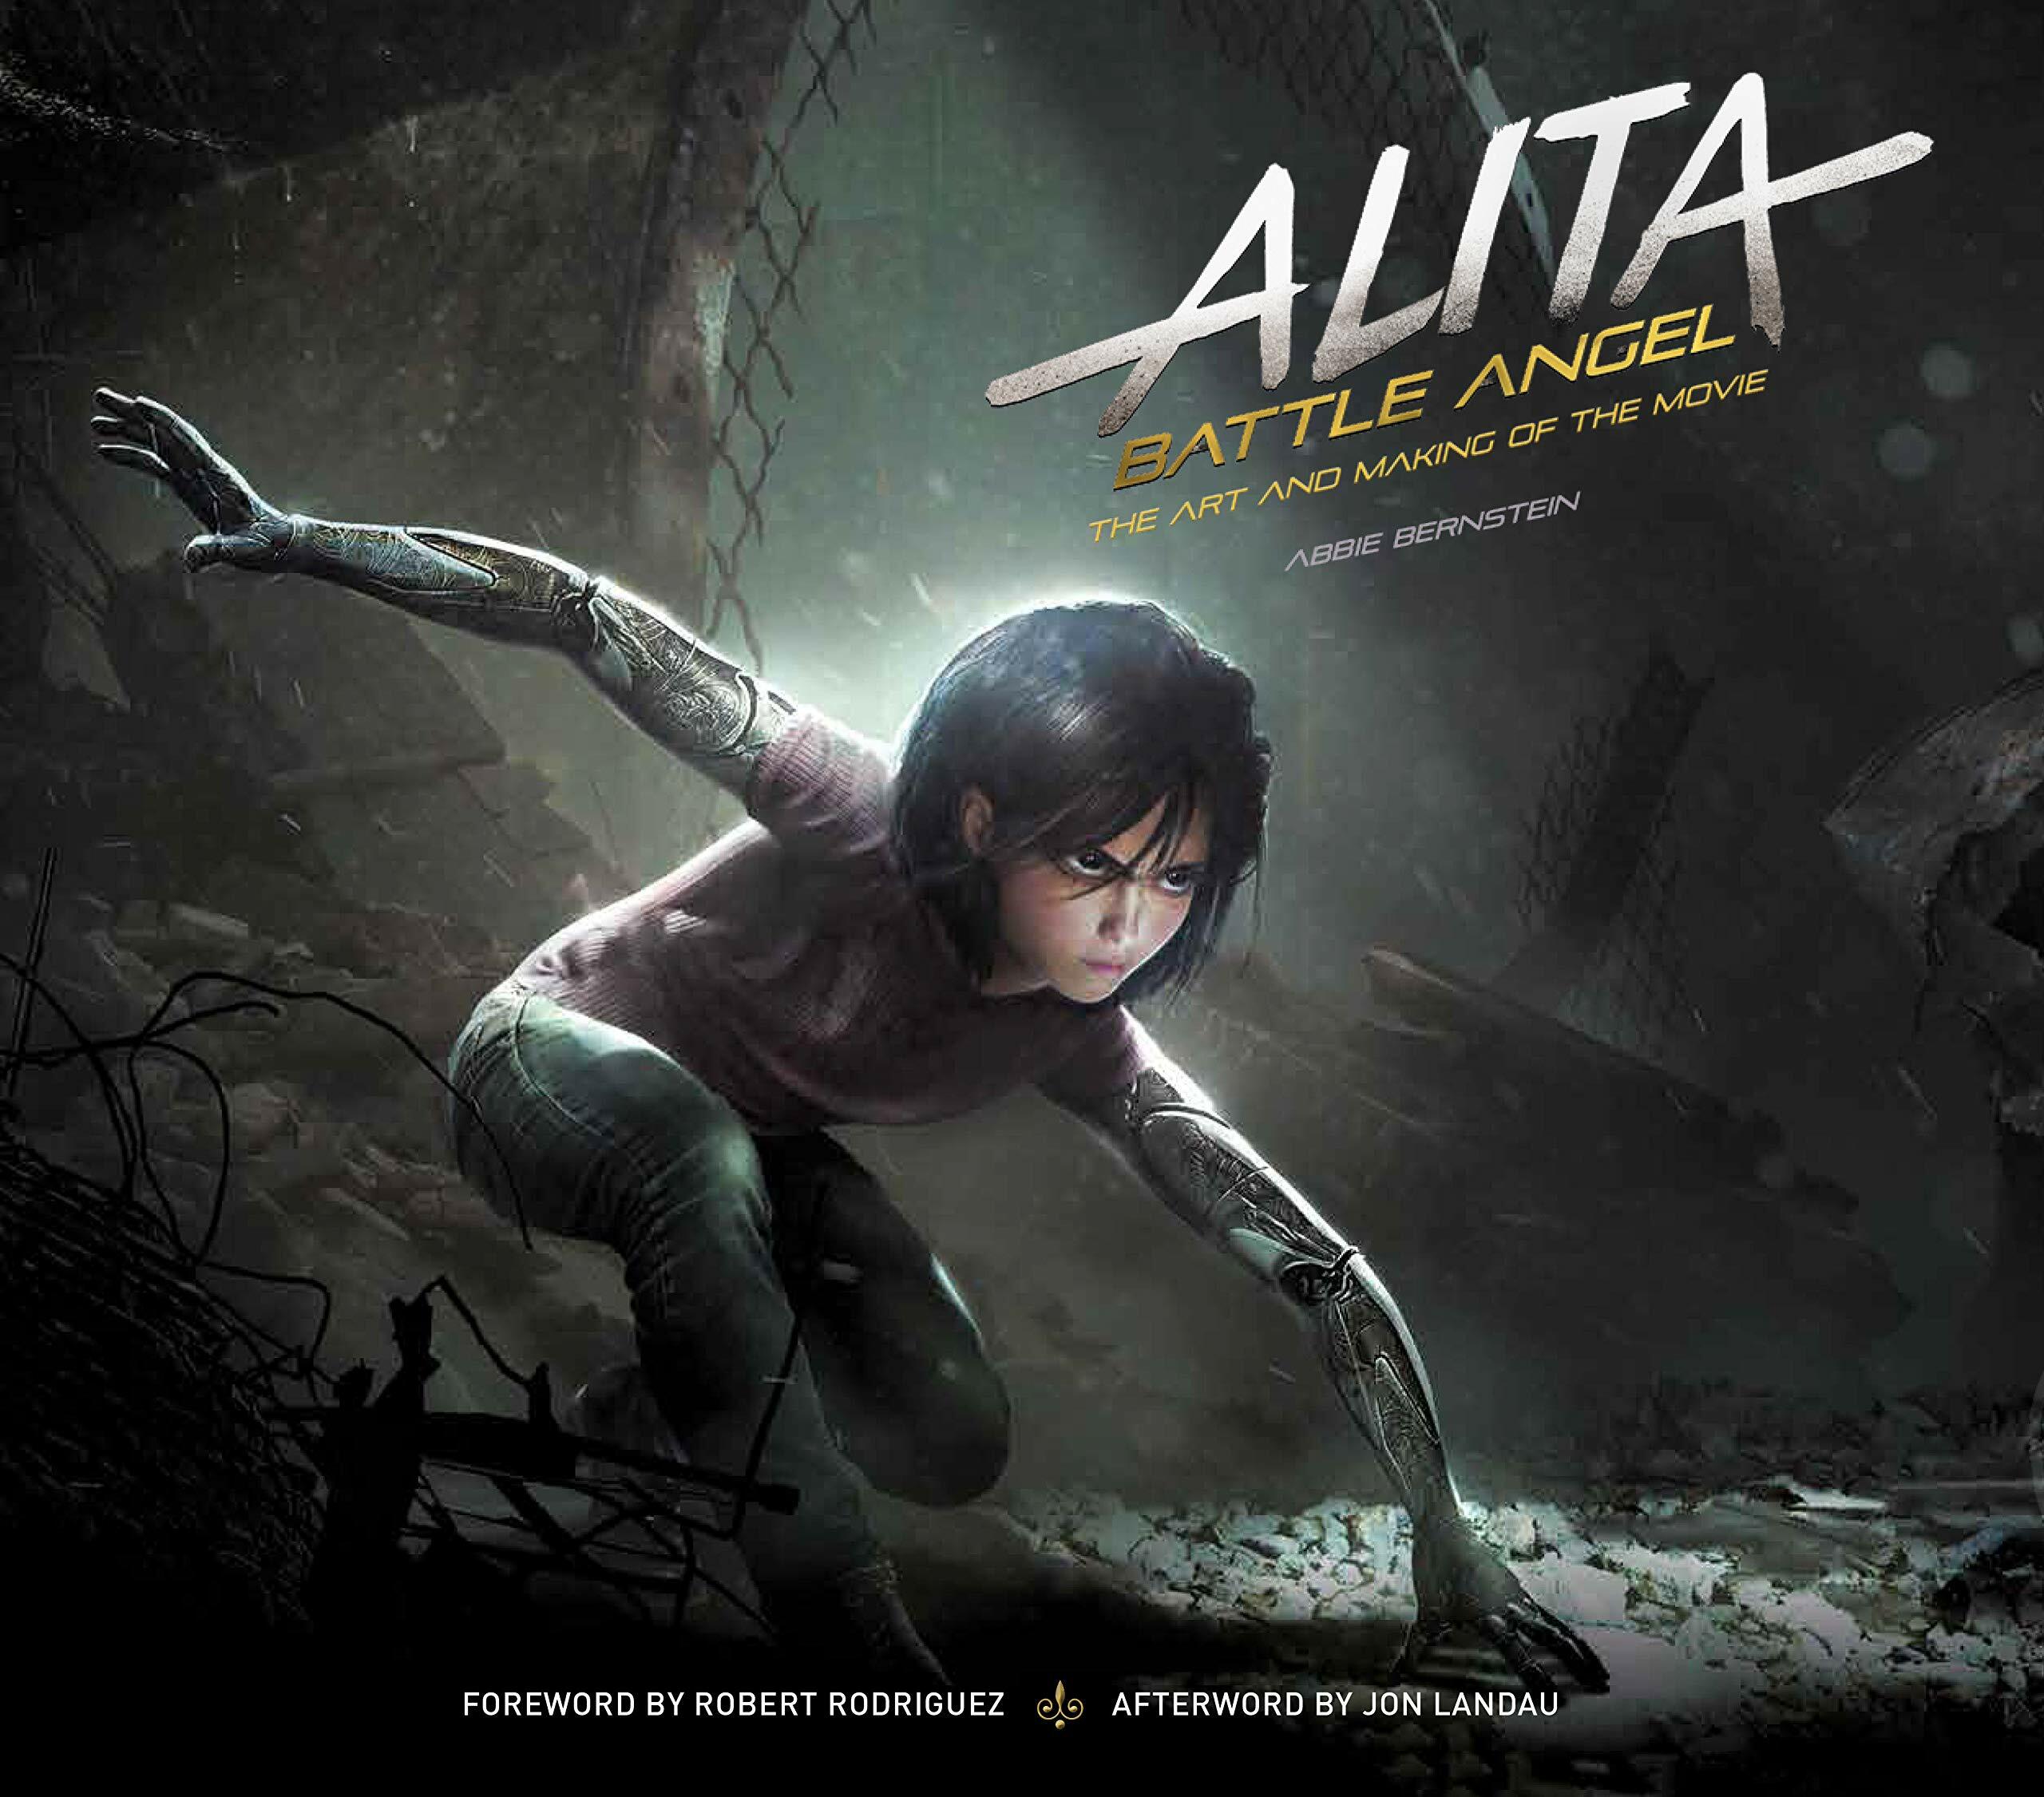 Alita: Battle Angel - The Art and Making of the Movie (Hardcover)